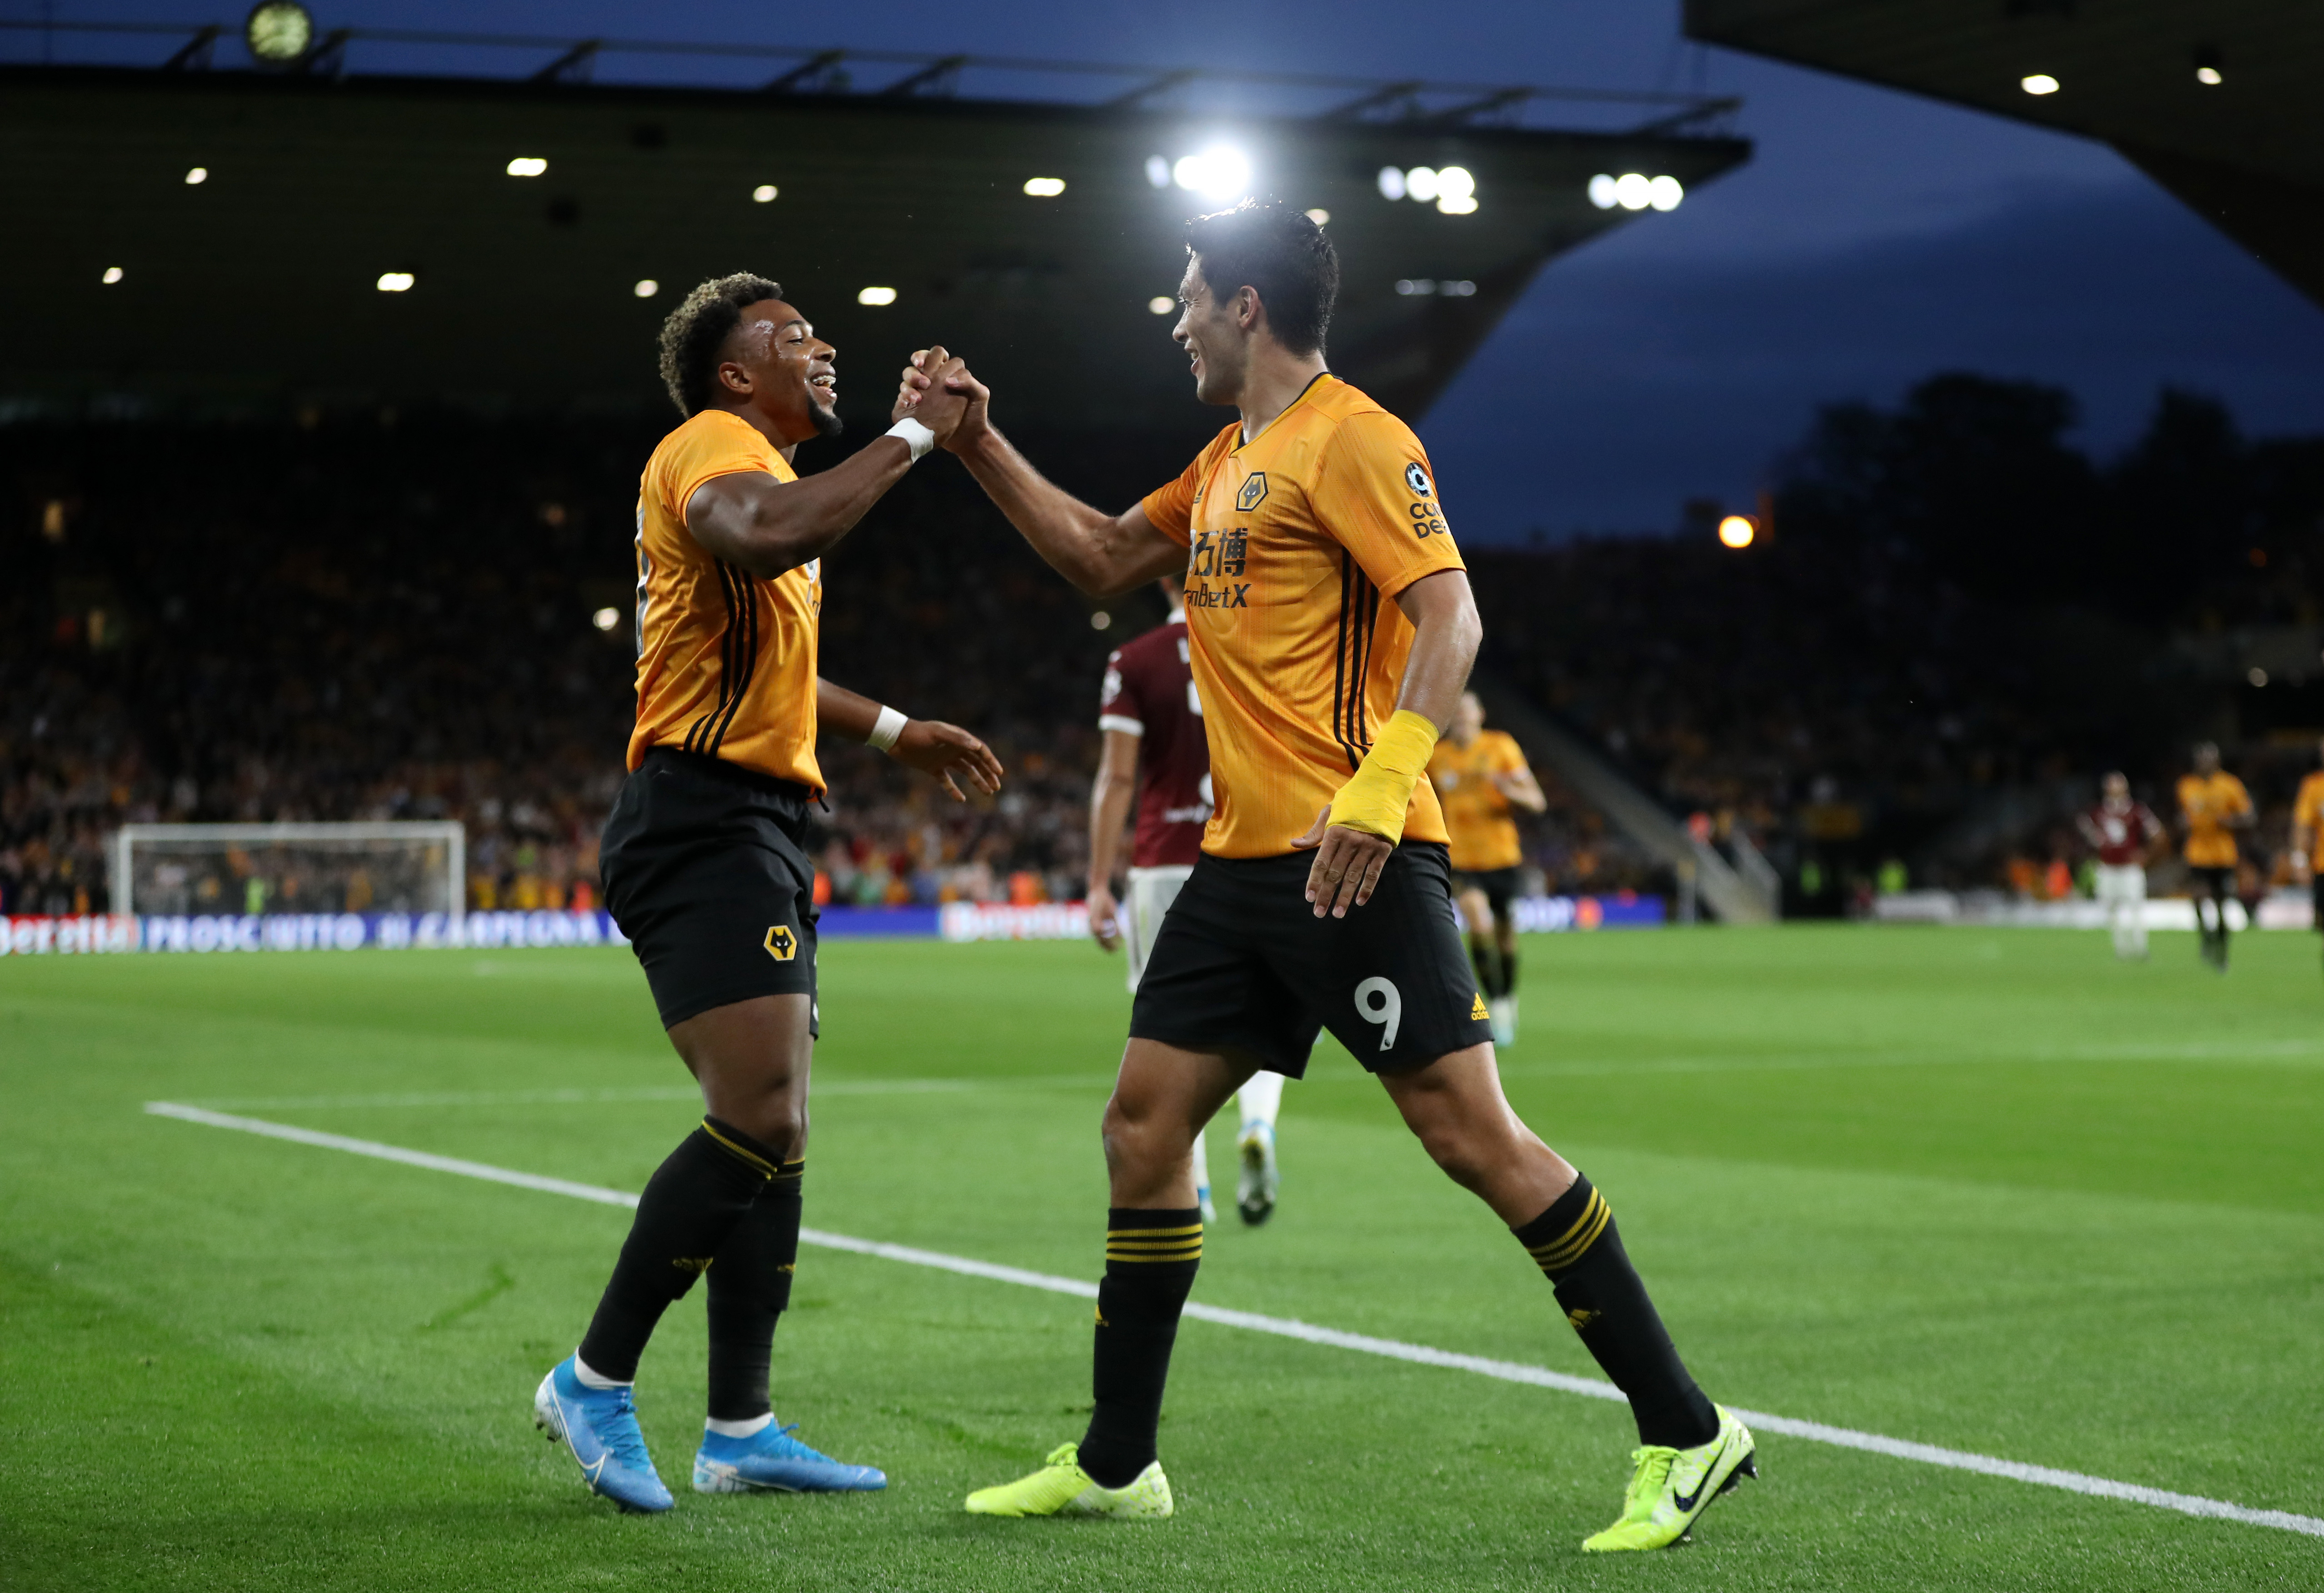 WOLVERHAMPTON, ENGLAND - AUGUST 29: Raul Jimenez of Wolverhampton Wanderers (R) celebrates with team mate Adama Traore (L) after scoring his team's first goal during the UEFA Europa League Play-Off: Second Leg match between Wolverhampton Wanderers and Torino at Molineux on August 29, 2019 in Wolverhampton, England. (Photo by David Rogers/Getty Images)